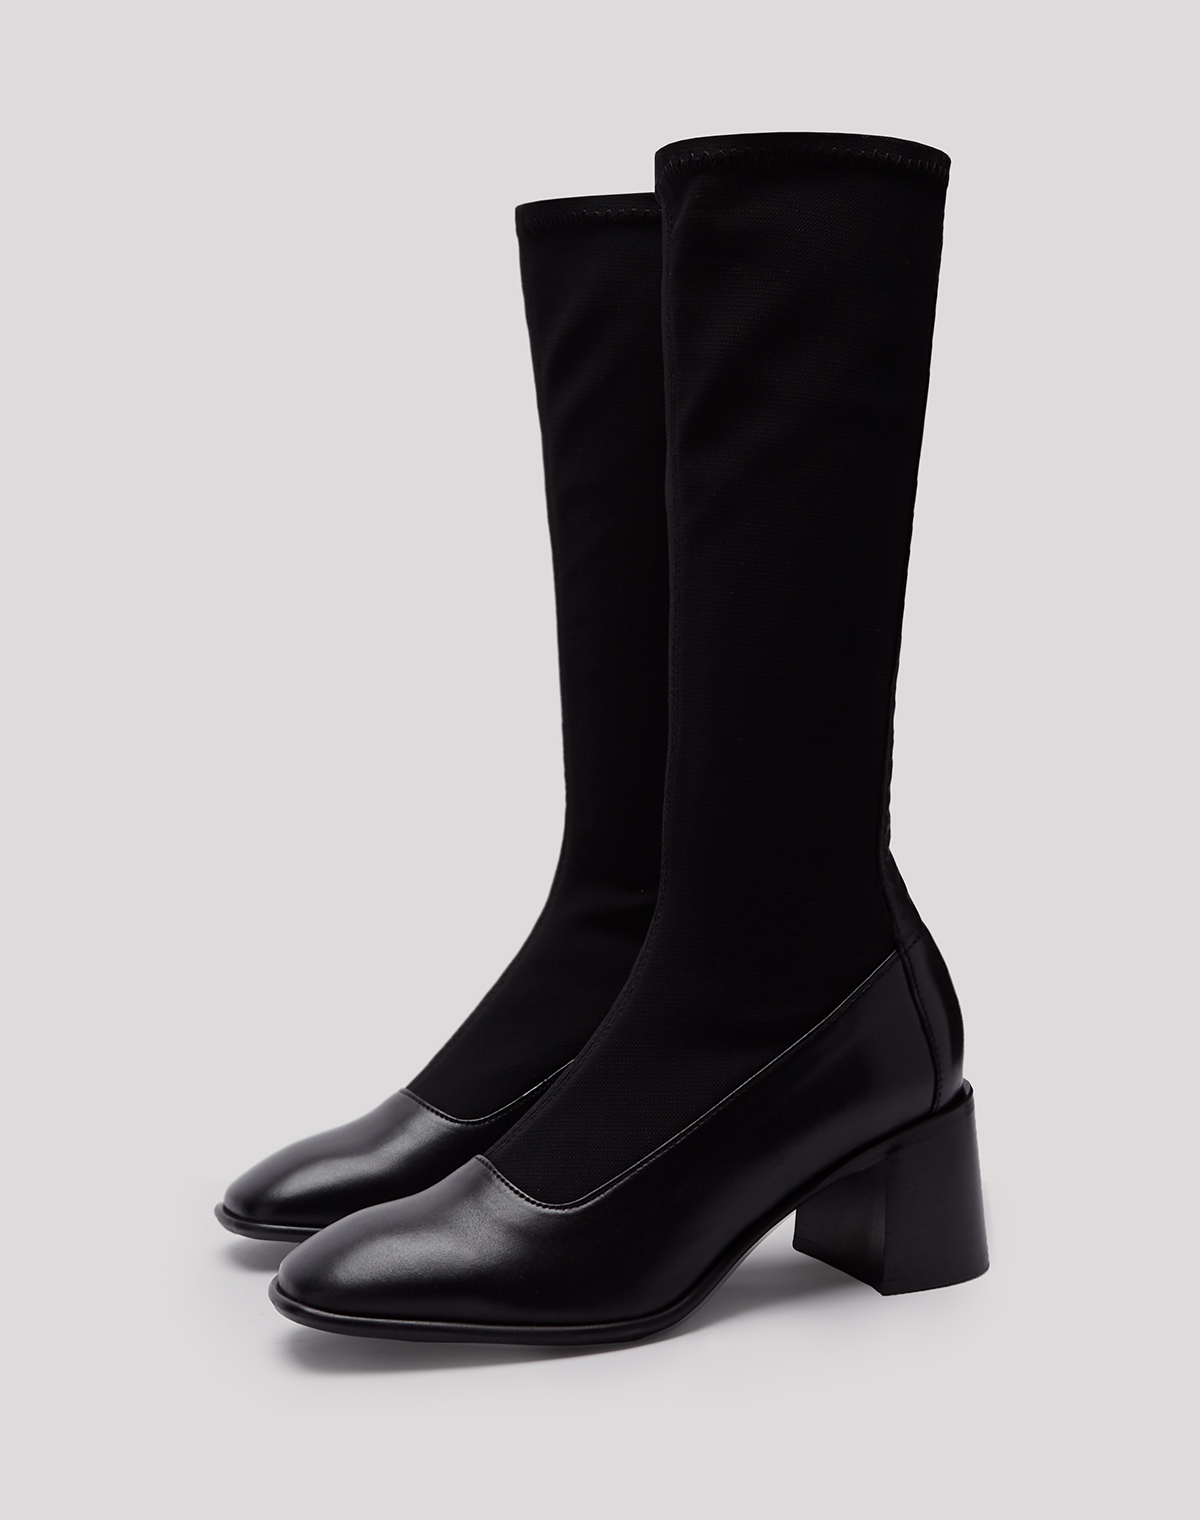 black leather stretch boots